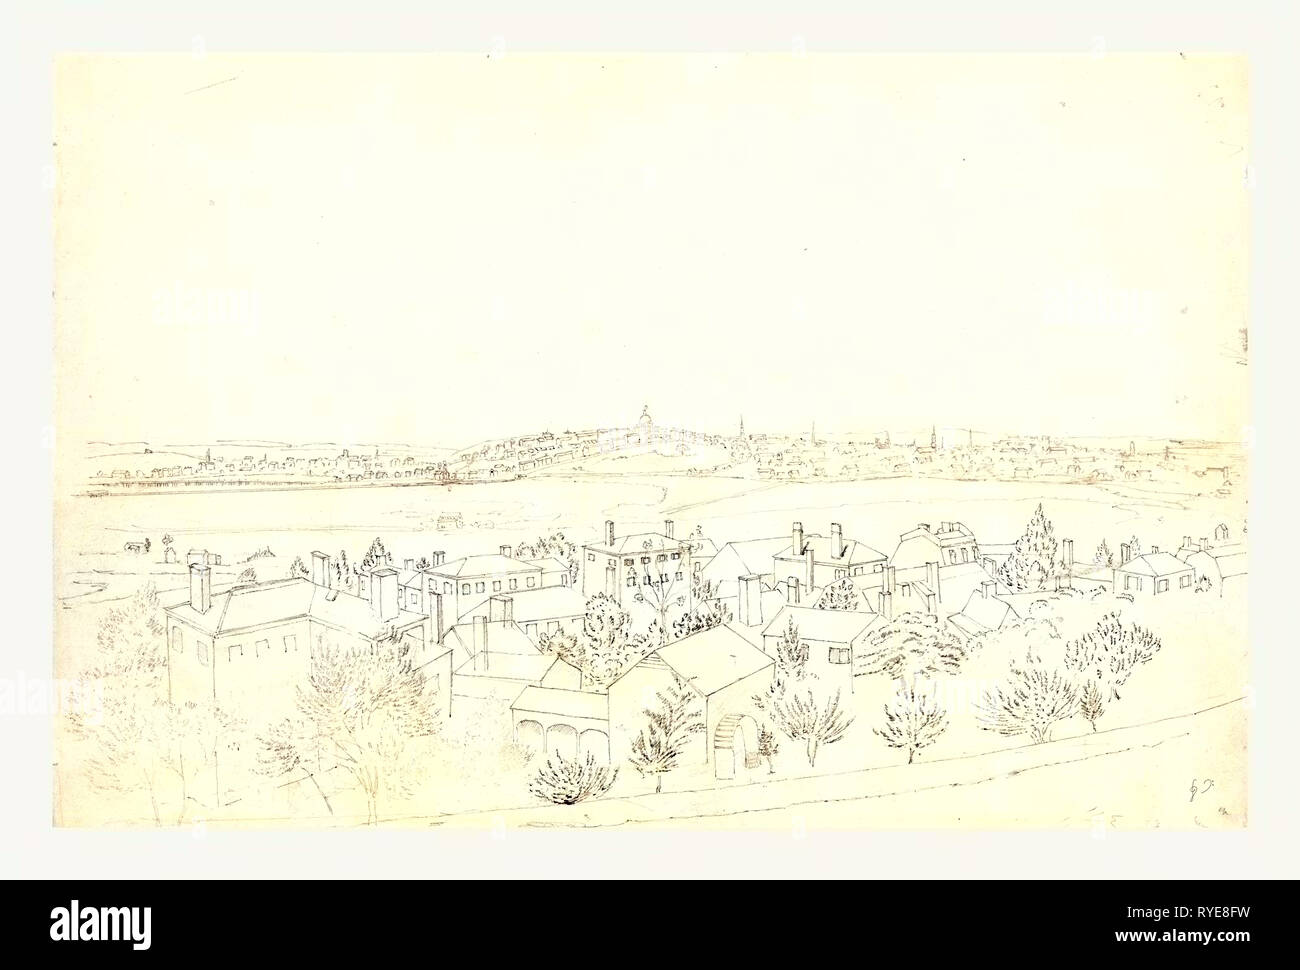 Boston, Charlestown & Bunker Hill As Seen from the Fort at Roxbury, 1828 Stock Photo